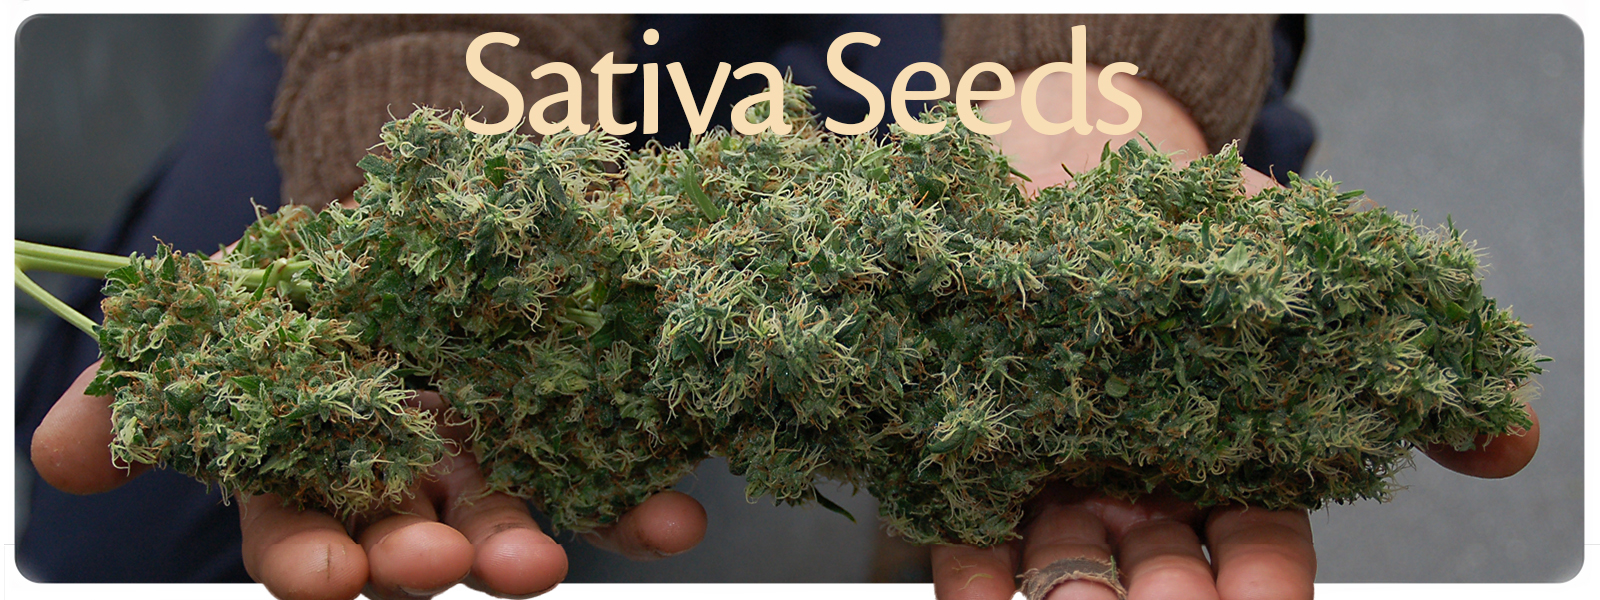 Sativa cannabis seeds from sanniesshop for the best haze tasting long flowering cannabis strains